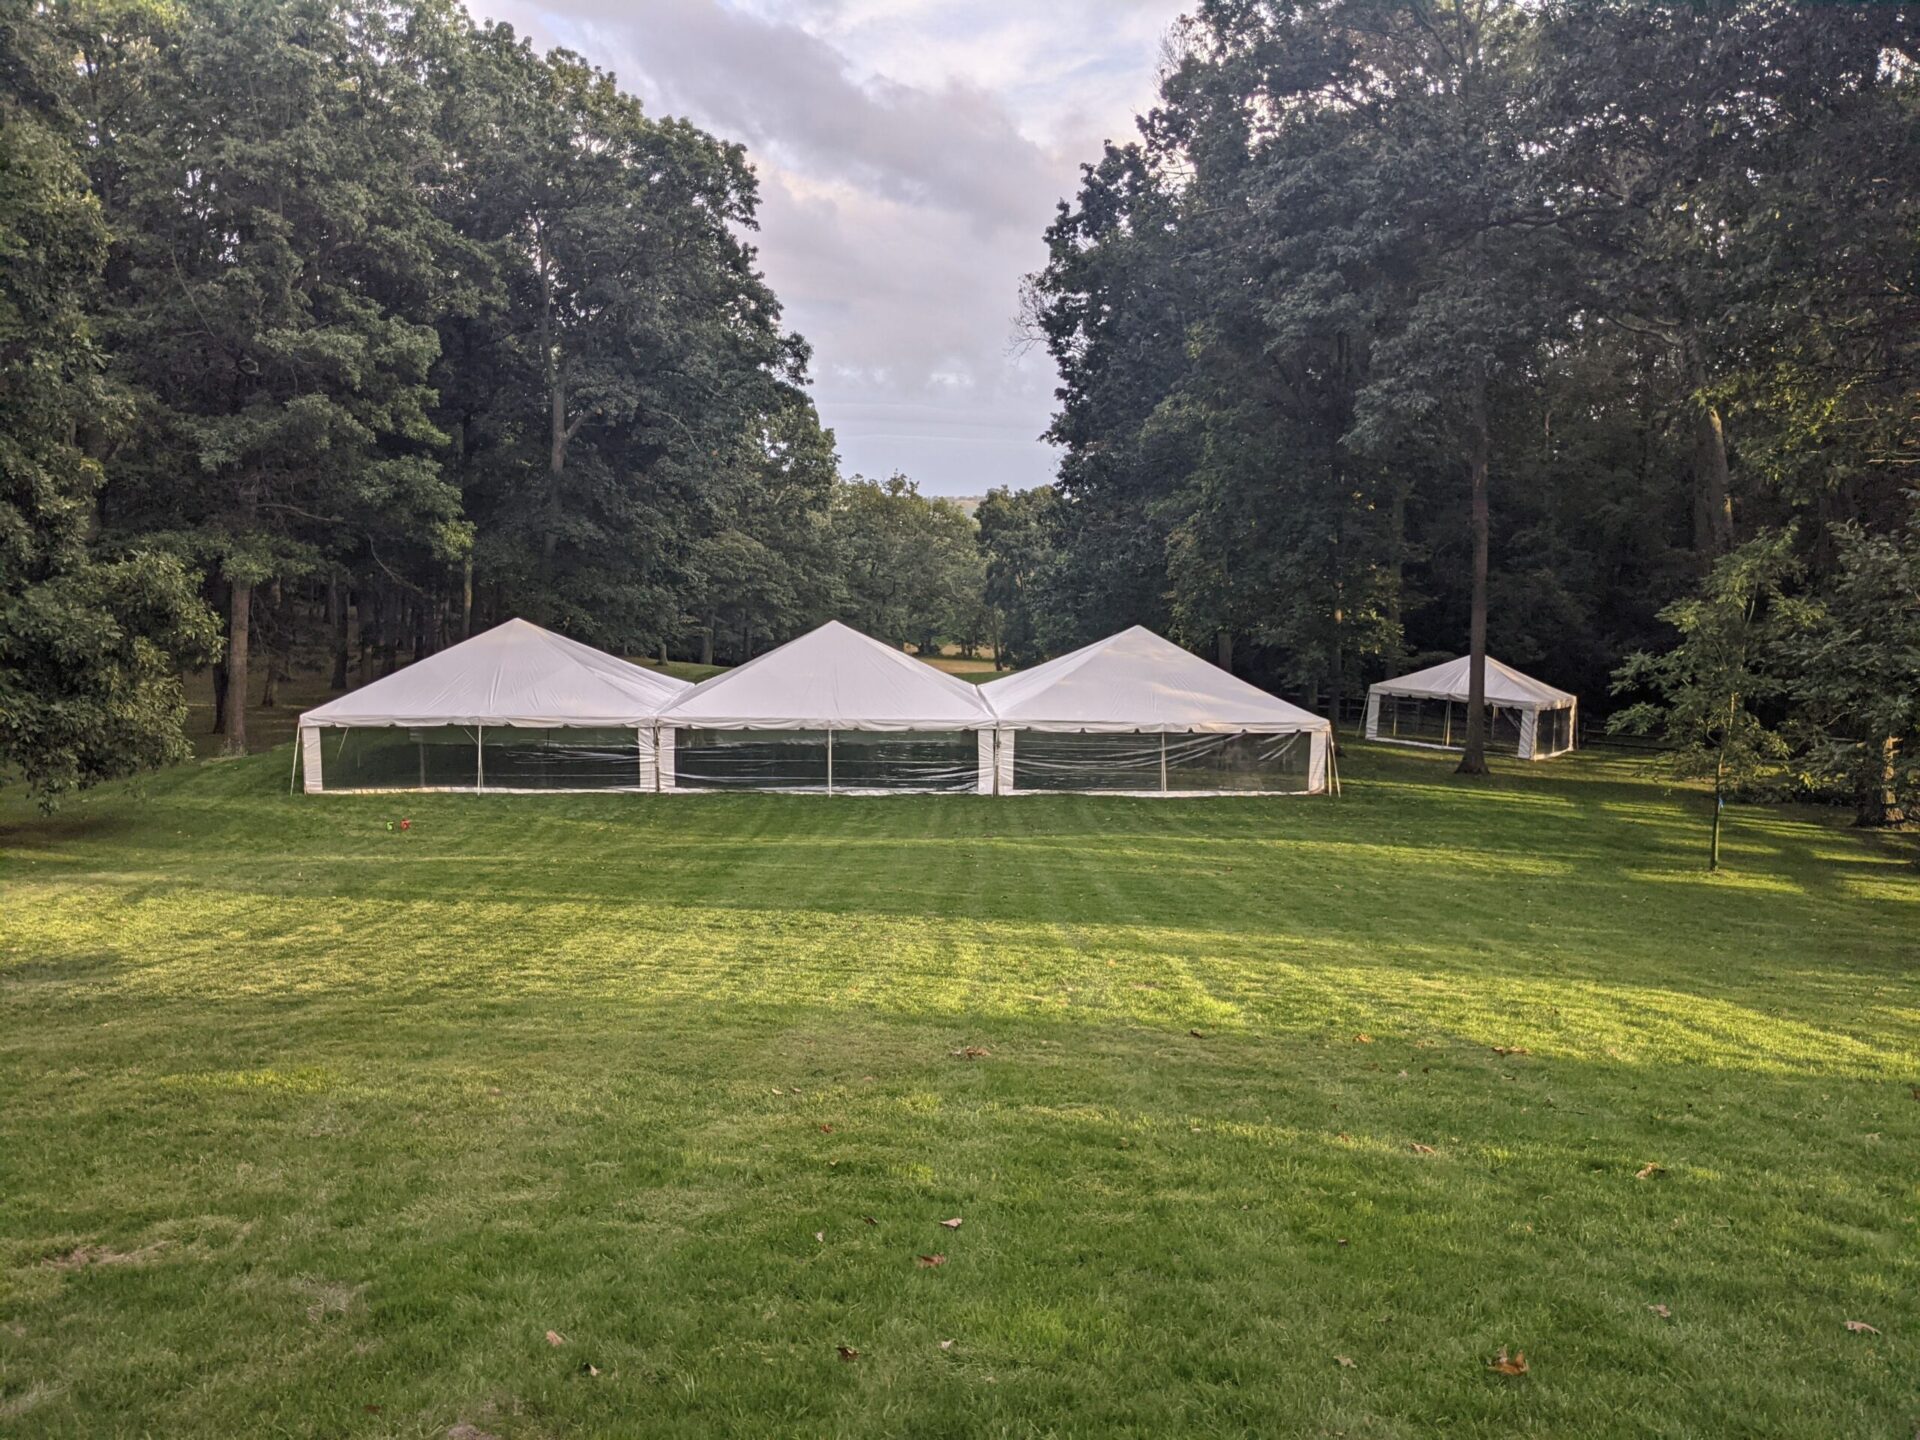 Four white tents surrounded by trees